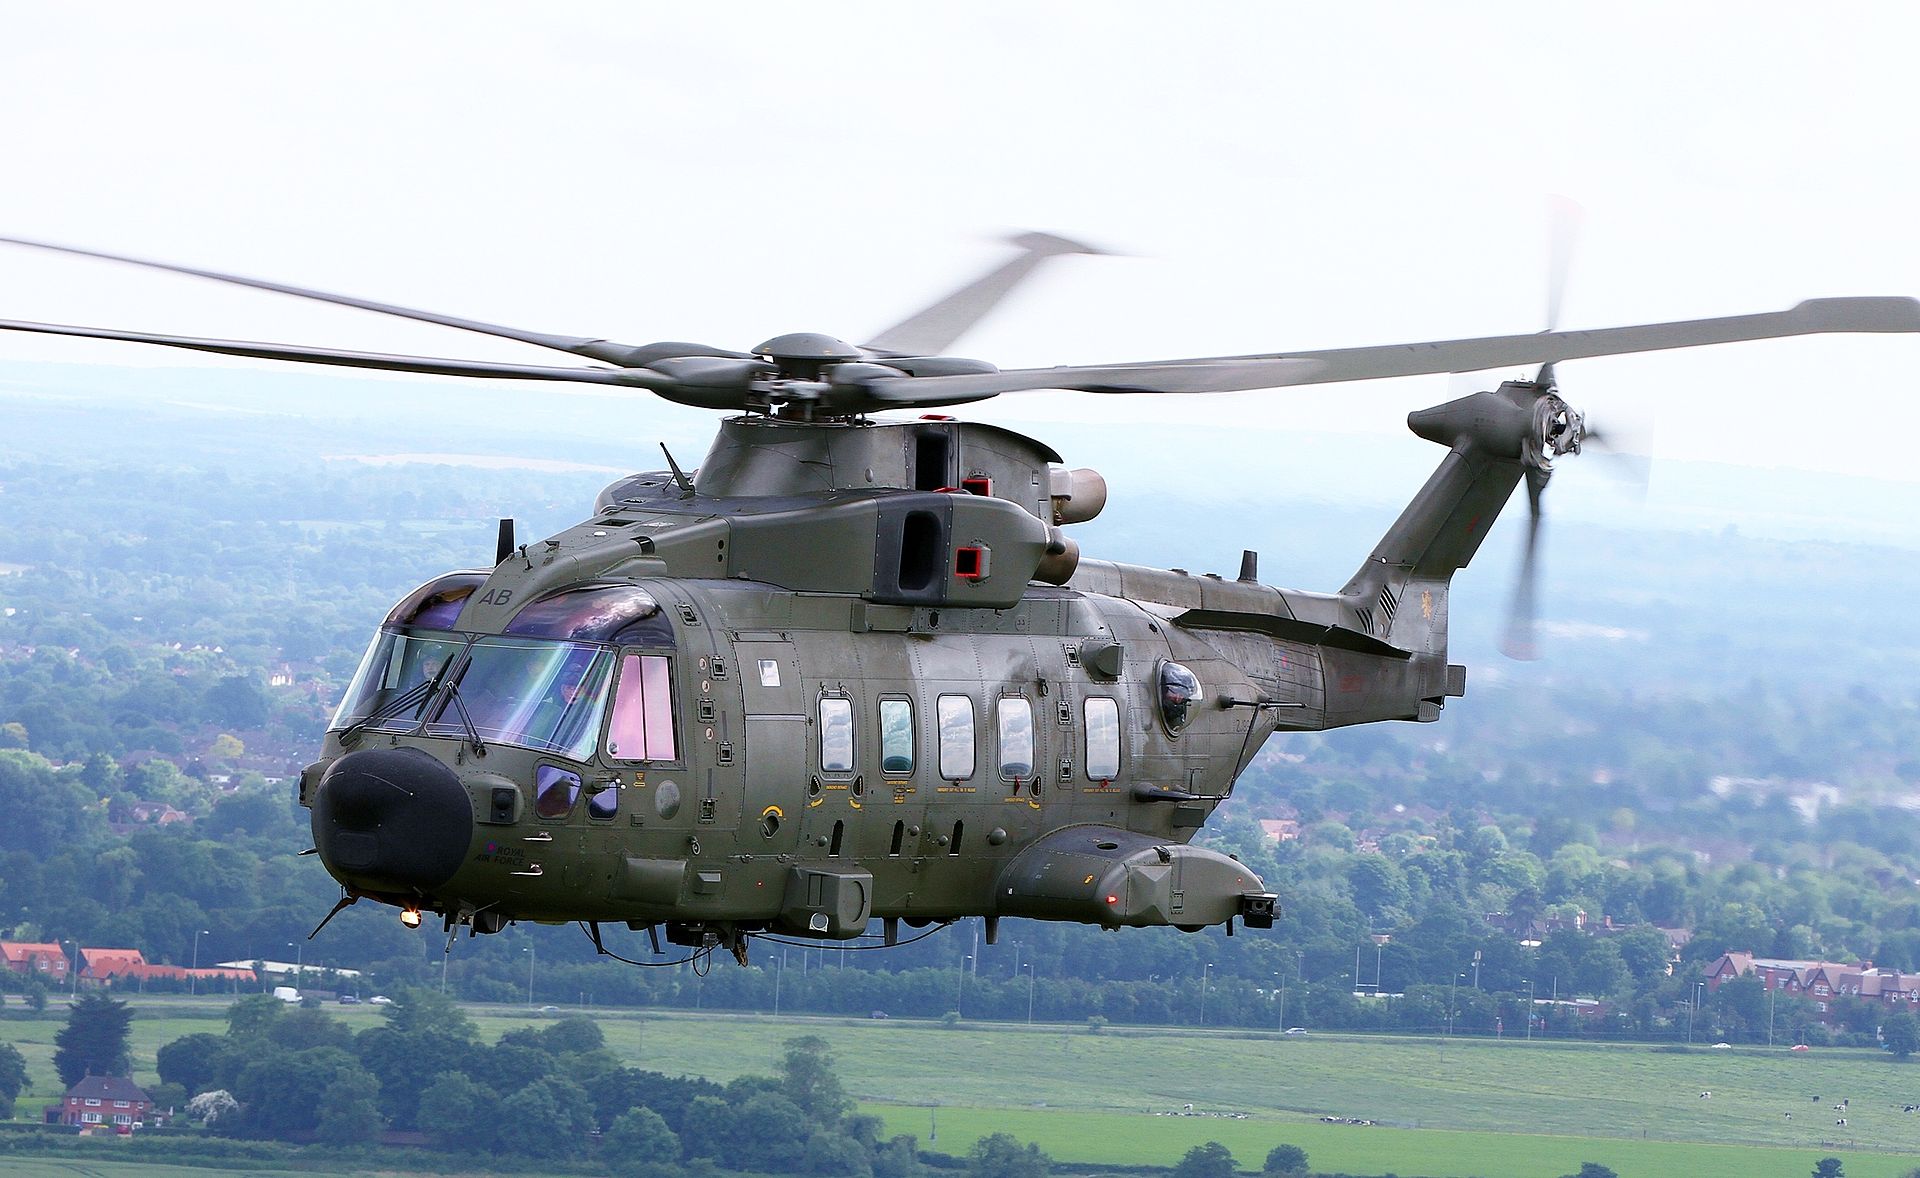 1920px-Royal_Air_Force_Merlin_HC3A_helicopter_training_flight_over_Oxfordshire%2C_Buckinghamshire_%28cropped%29.jpg